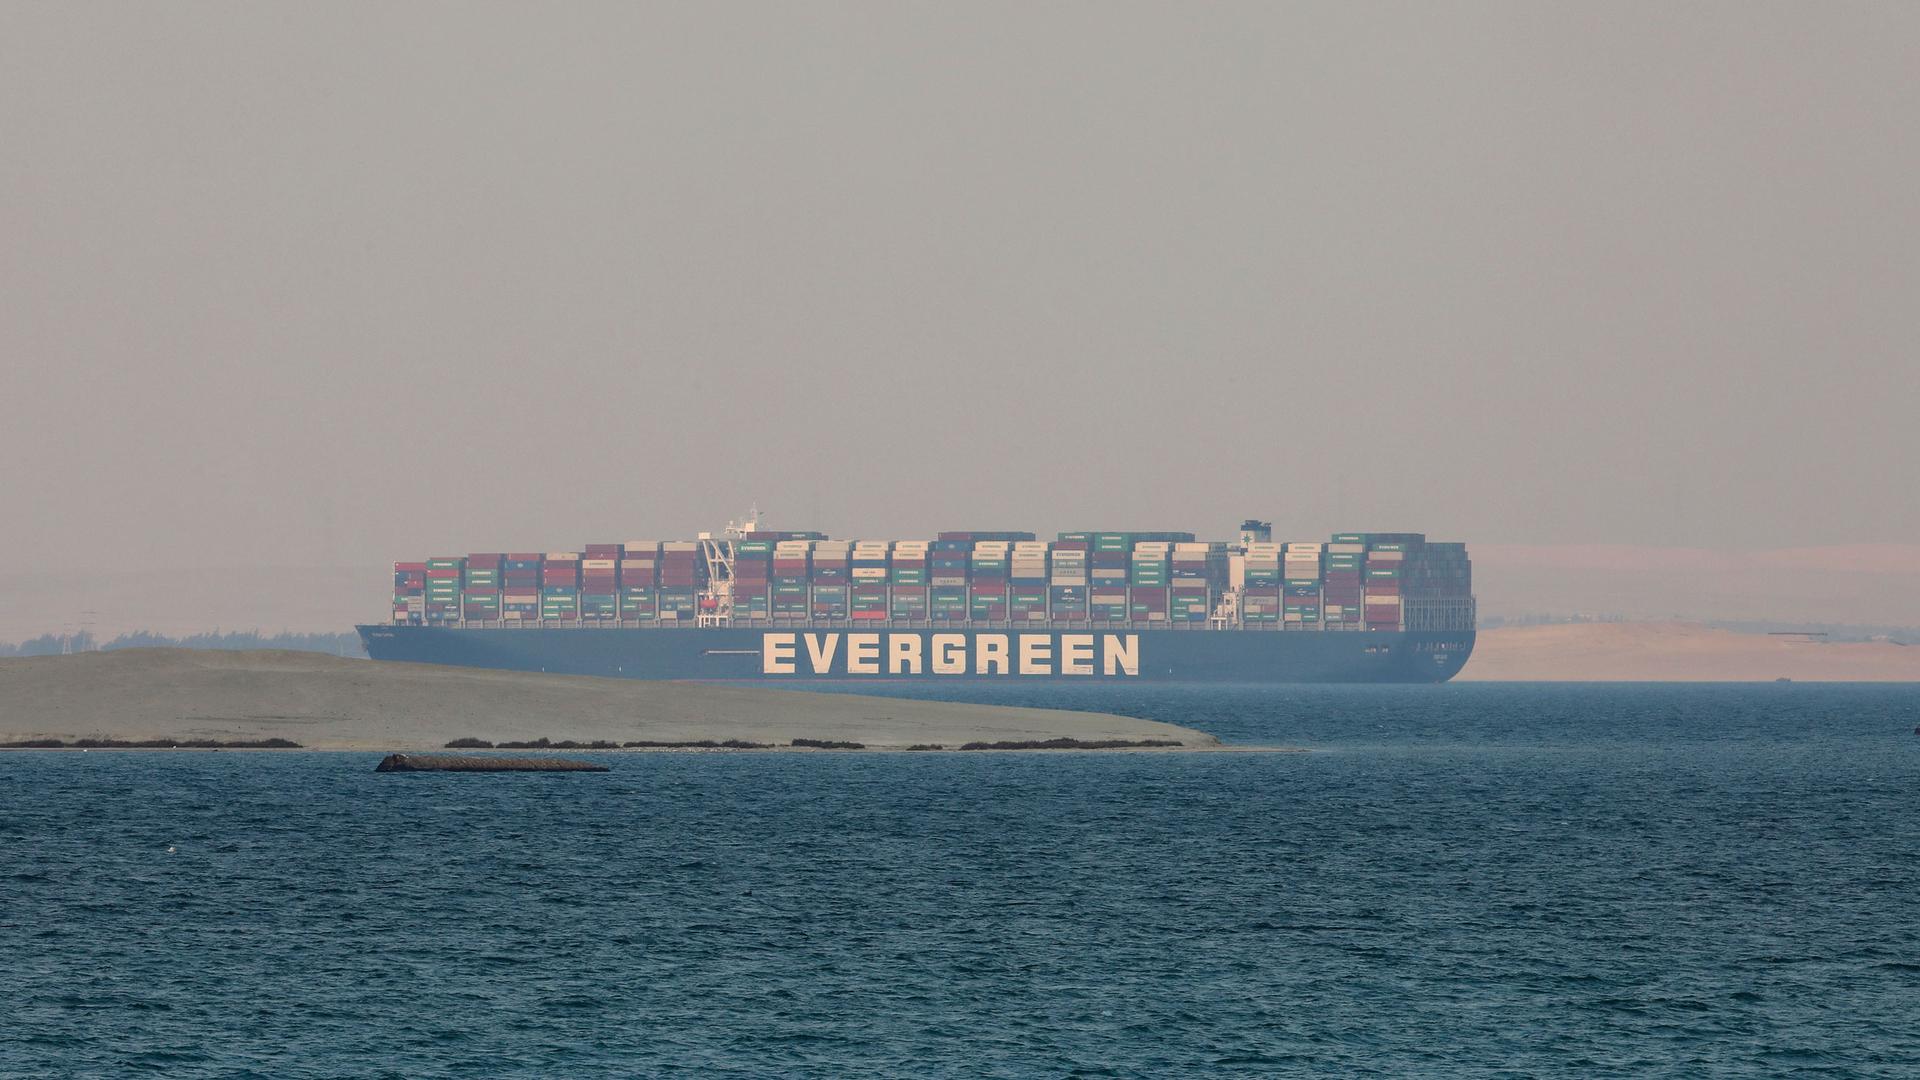 The massive cargo ship, the Ever Given, is shown in the watery distance stacked with containers.